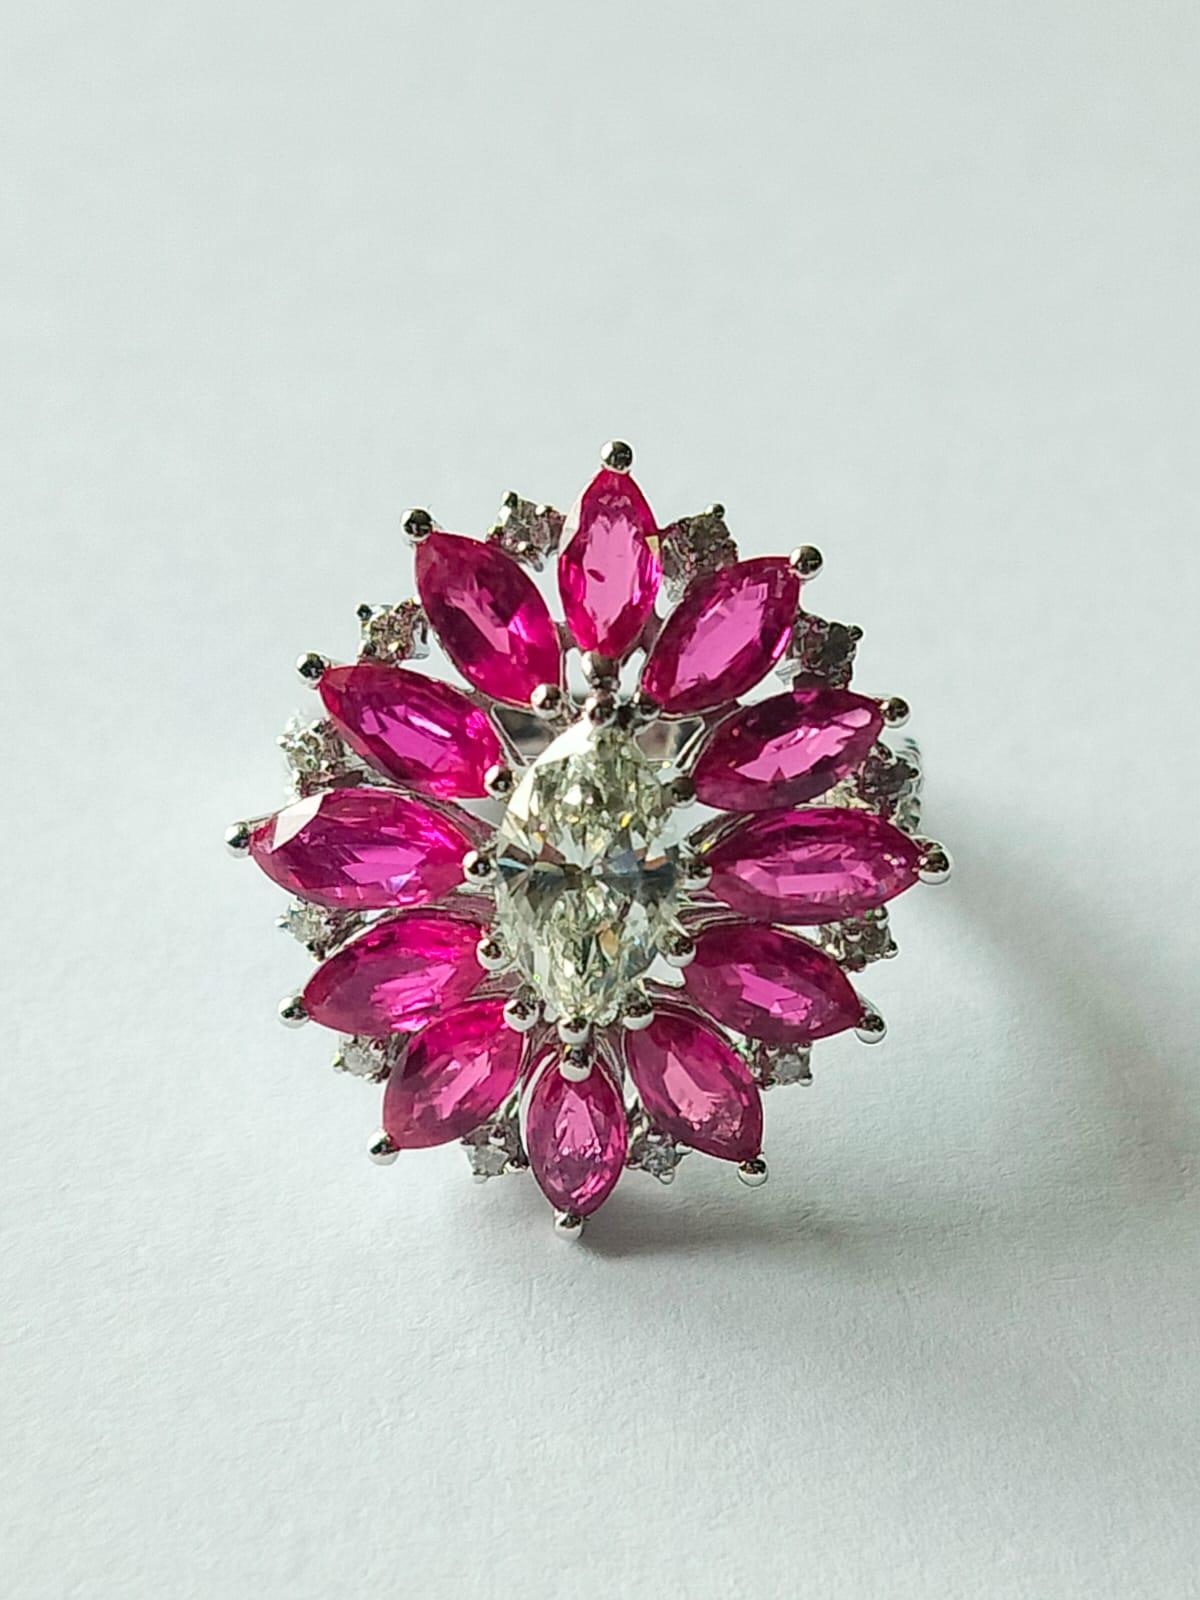 A classic Modern style Ruby Cocktail/Engagement Ring set in 18K Gold & Diamonds. The weight of the Ruby is 4.11 carats. The Marquise Ruby is completely natural, without any treatment and is of Mozambique origin. The combined weight of the diamonds